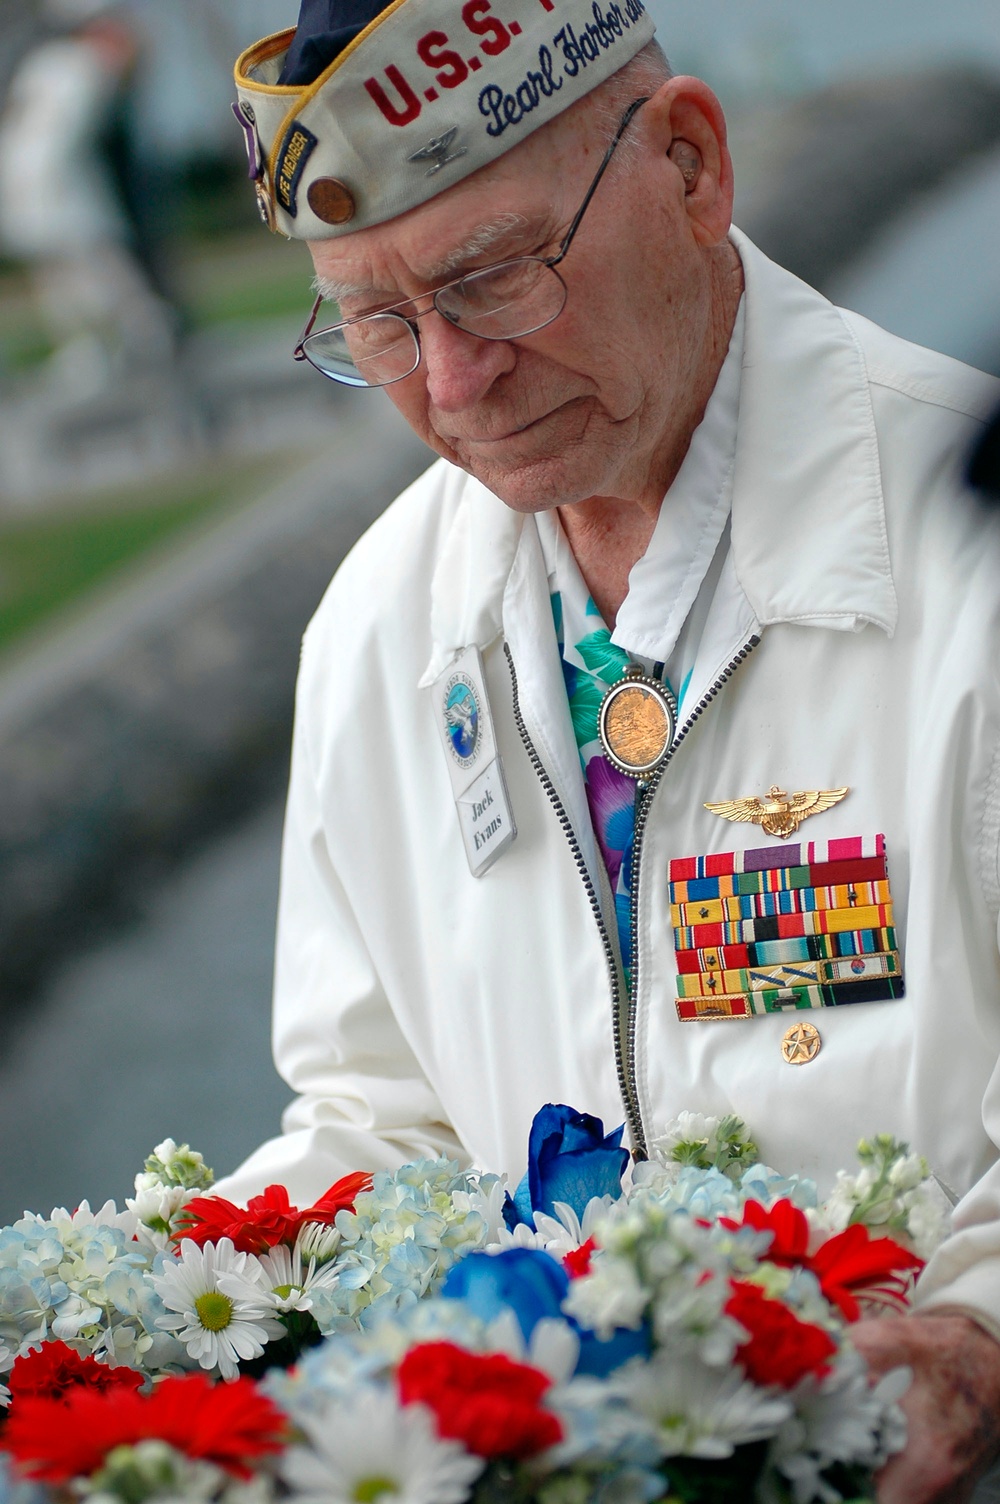 Attack on Pearl Harbor remembered aboard USS Midway Museum